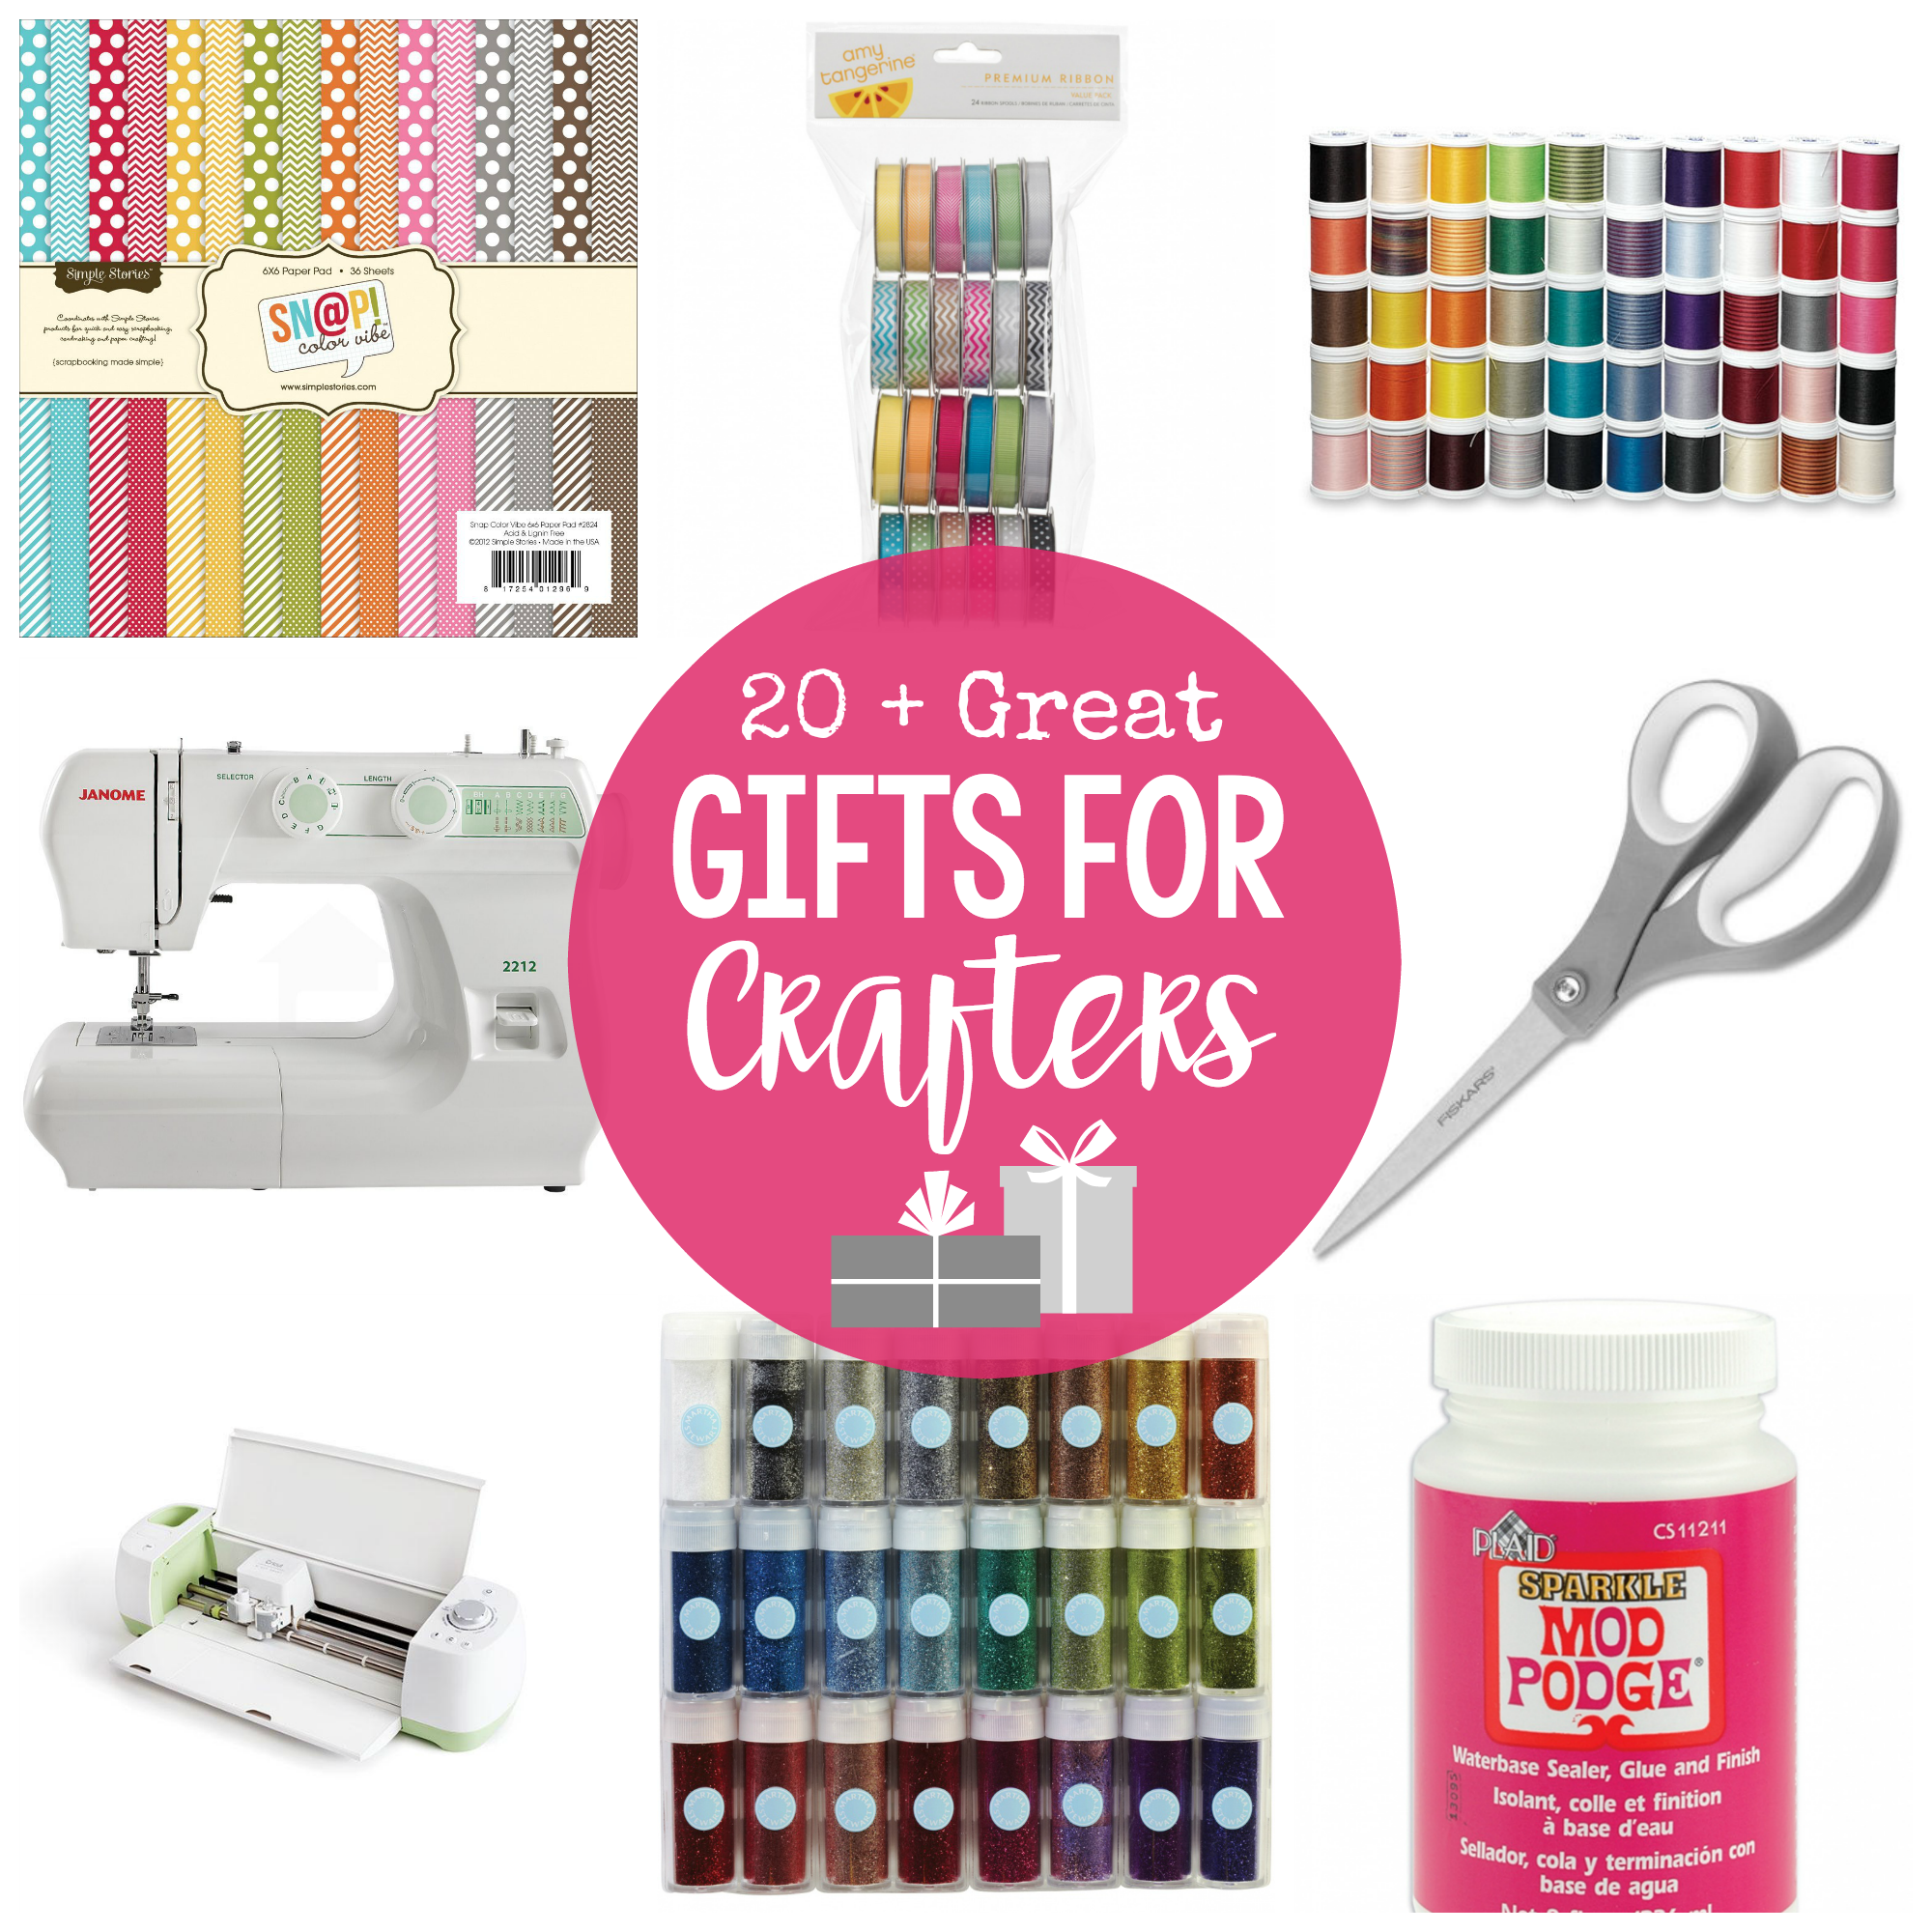 Great Gifts for Crafters